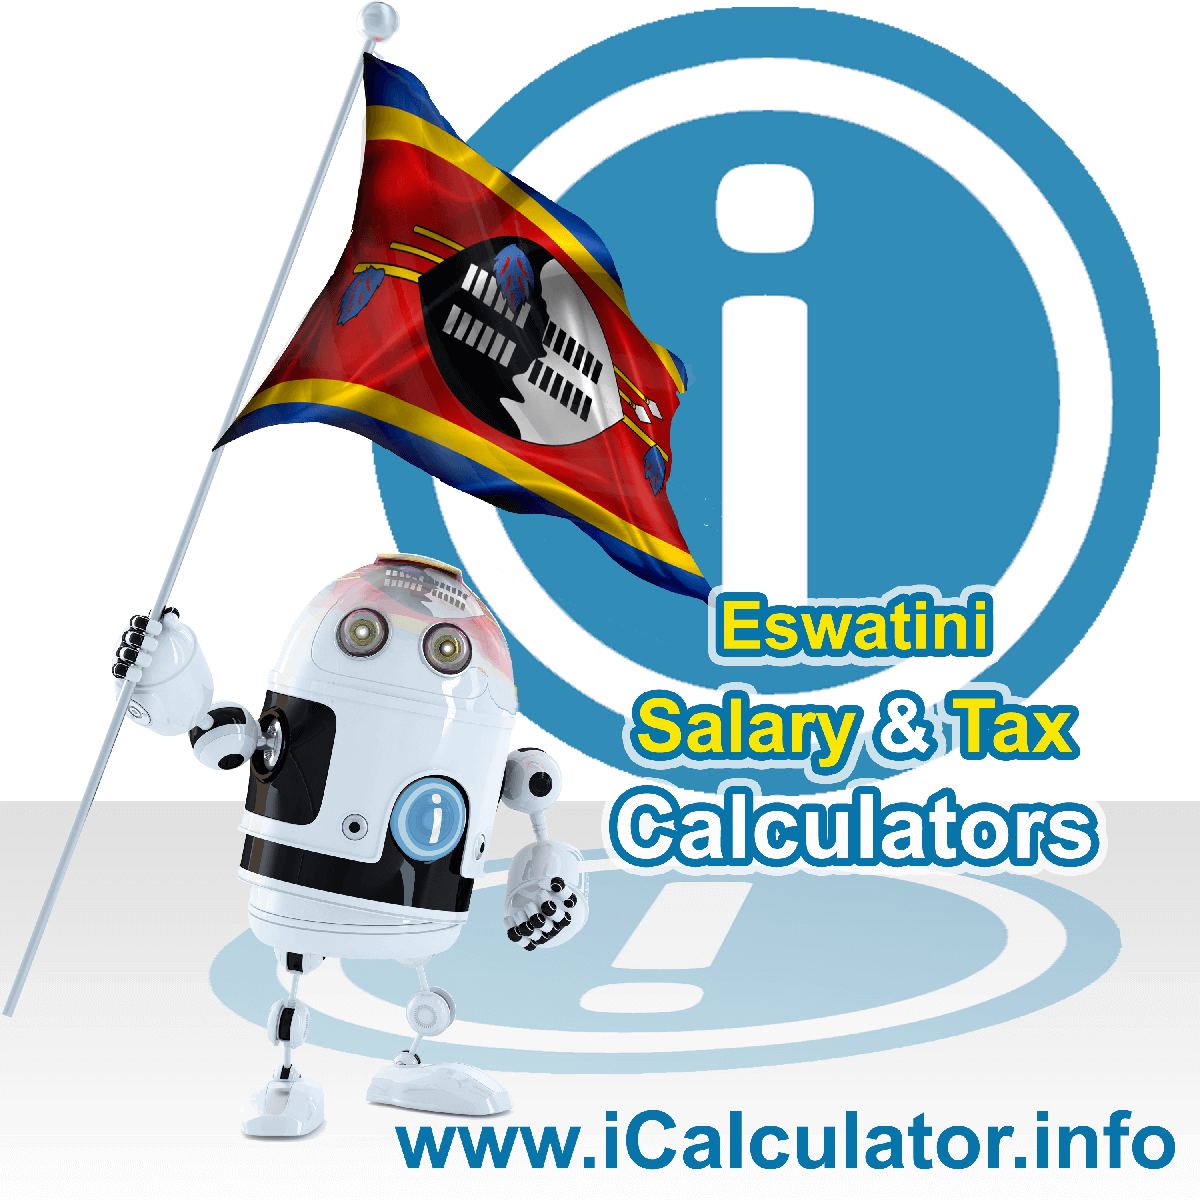 Swaziland Salary Calculator. This image shows the Swazilandese flag and information relating to the tax formula for the Swaziland Tax Calculator